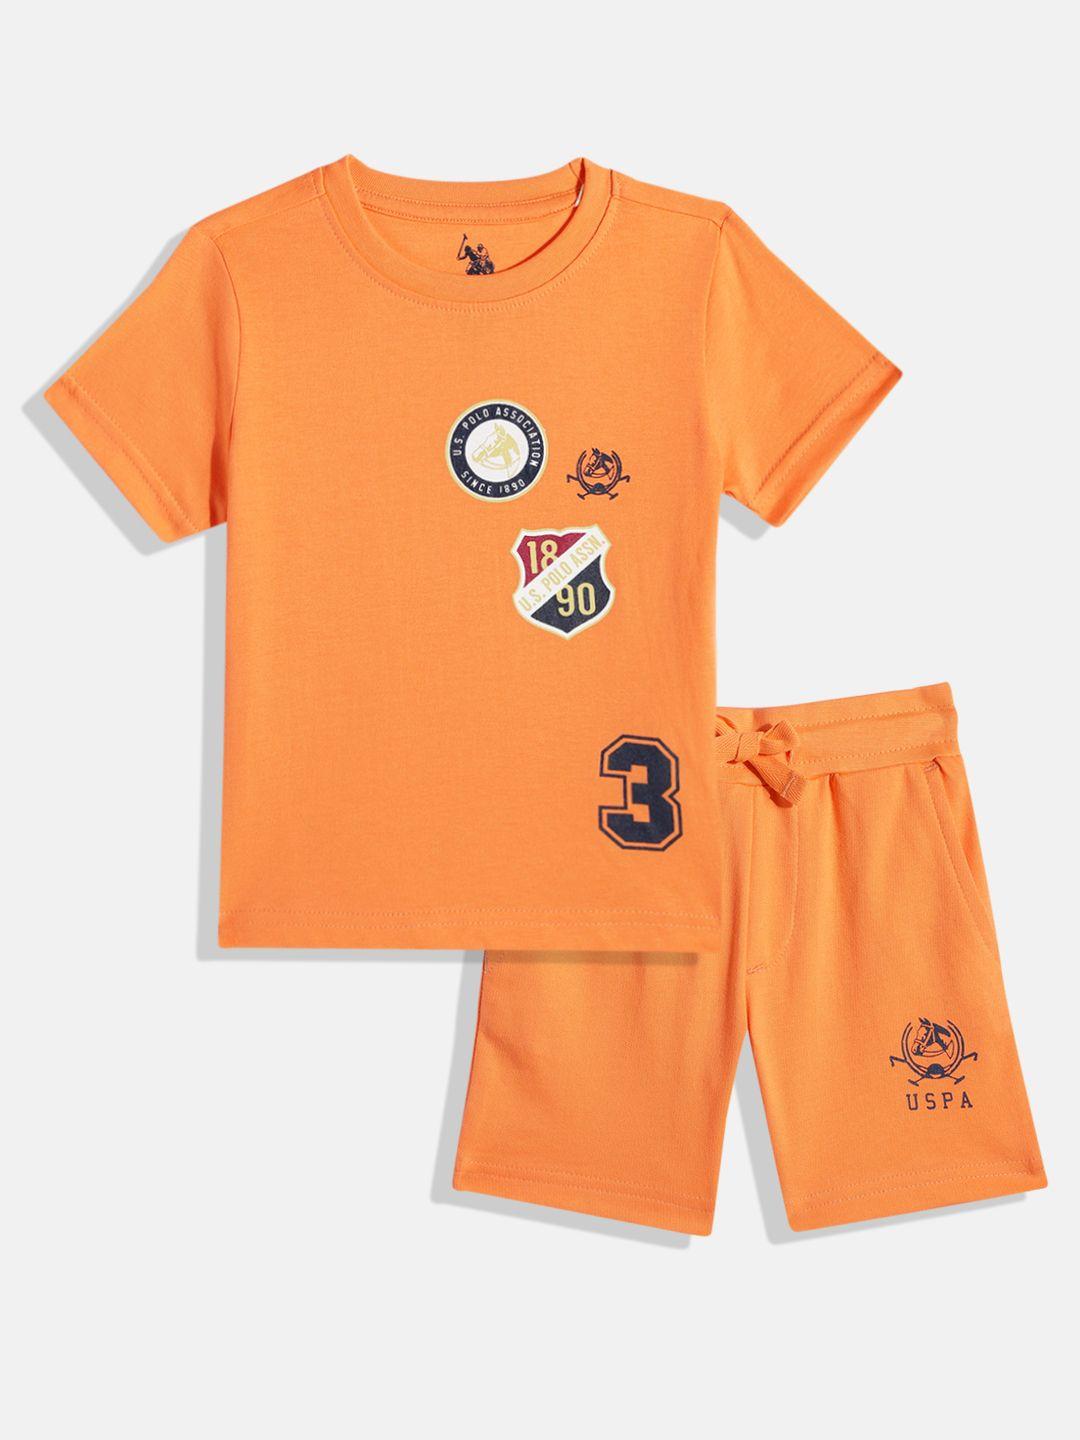 u.s. polo assn. kids boys brand logo placement print pure cotton t-shirt with shorts